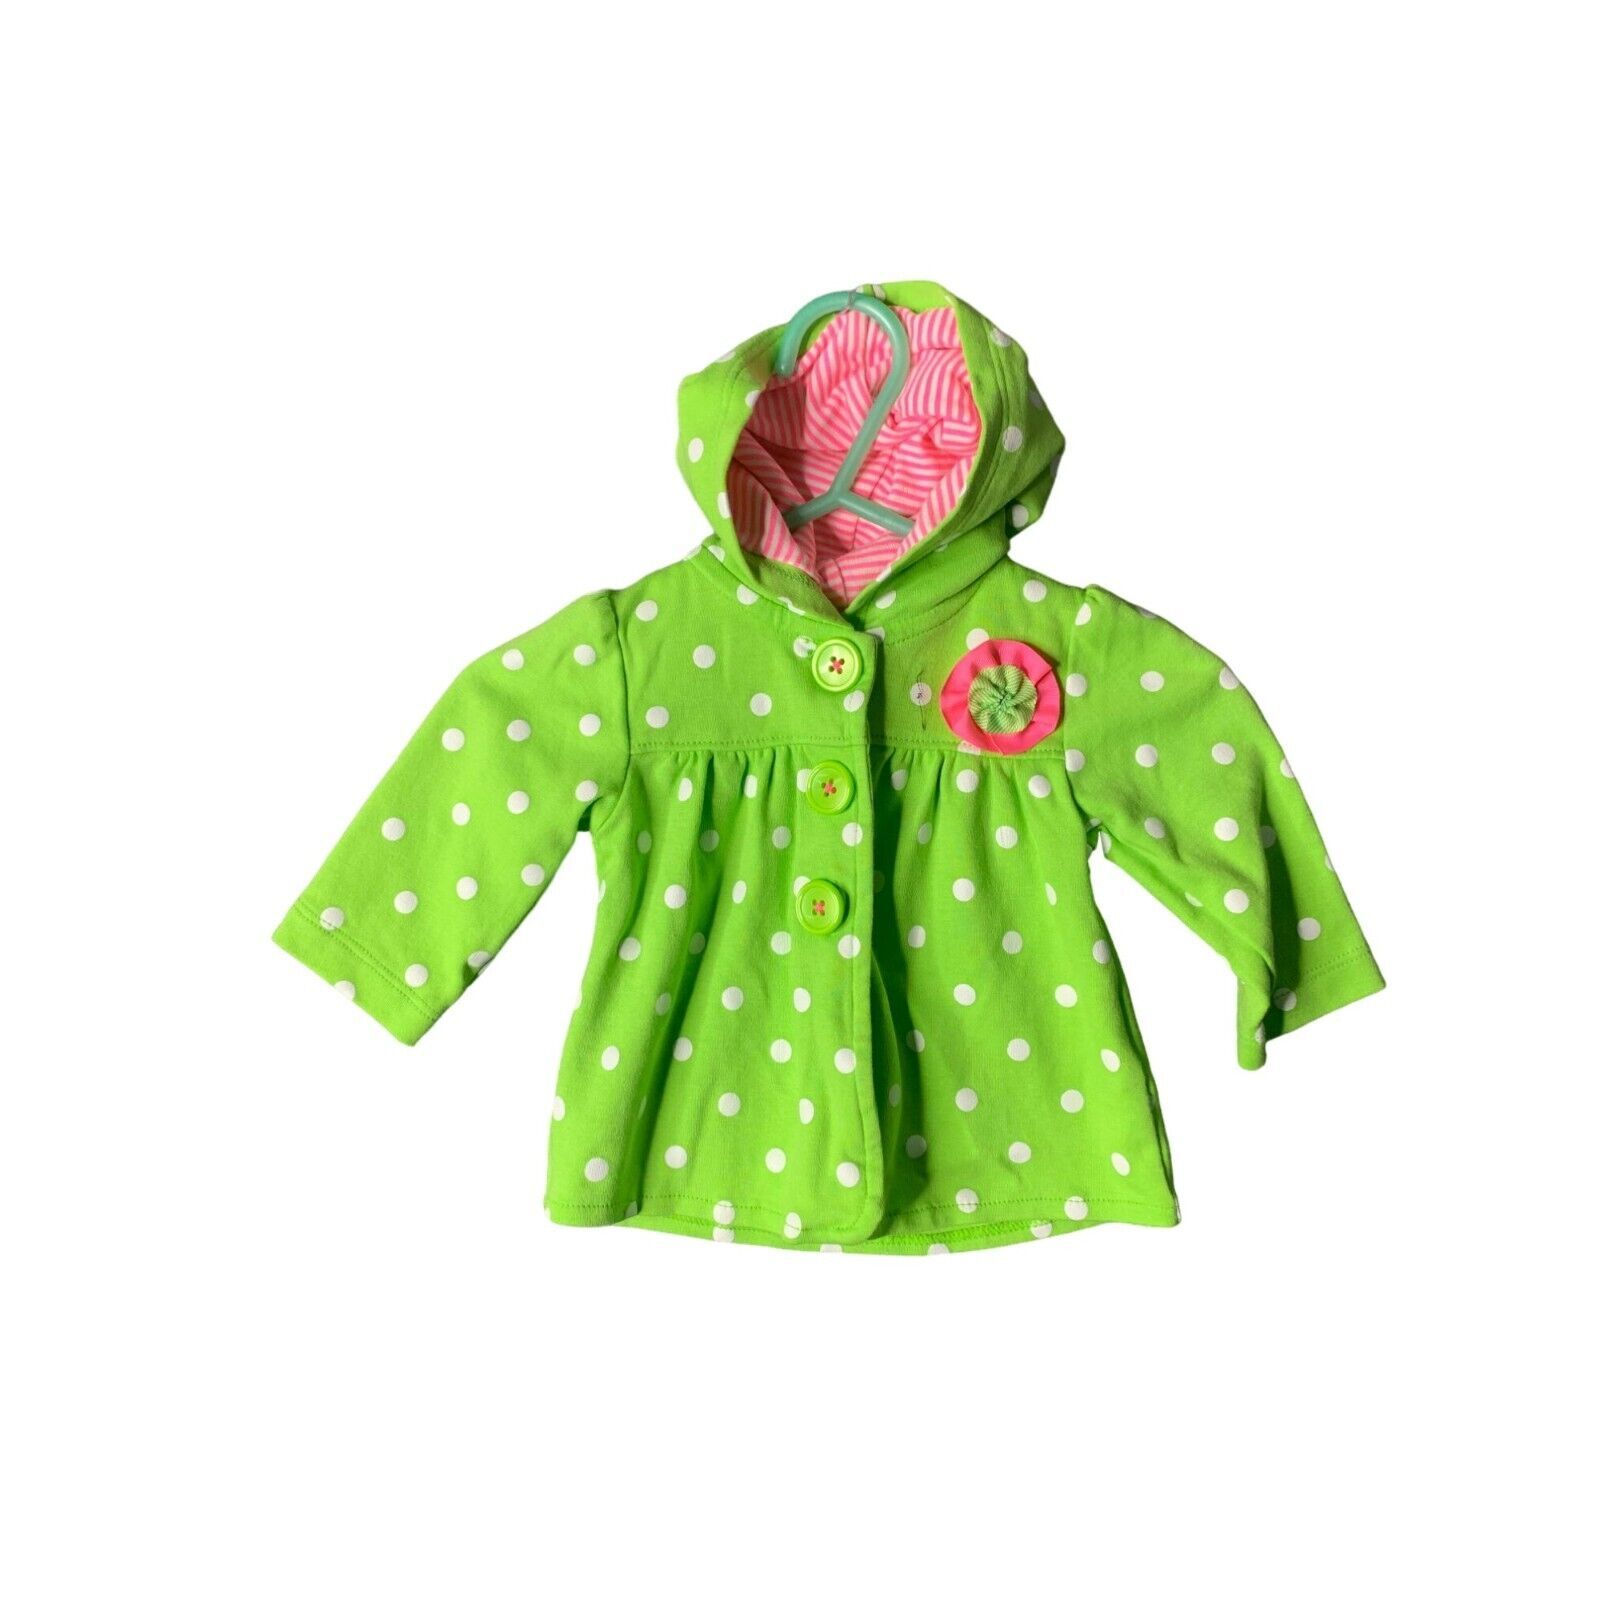 Carters Girls Infant Baby Size 3 Months Long Sleeve Hooded Button Up Jacket Coat - $8.90